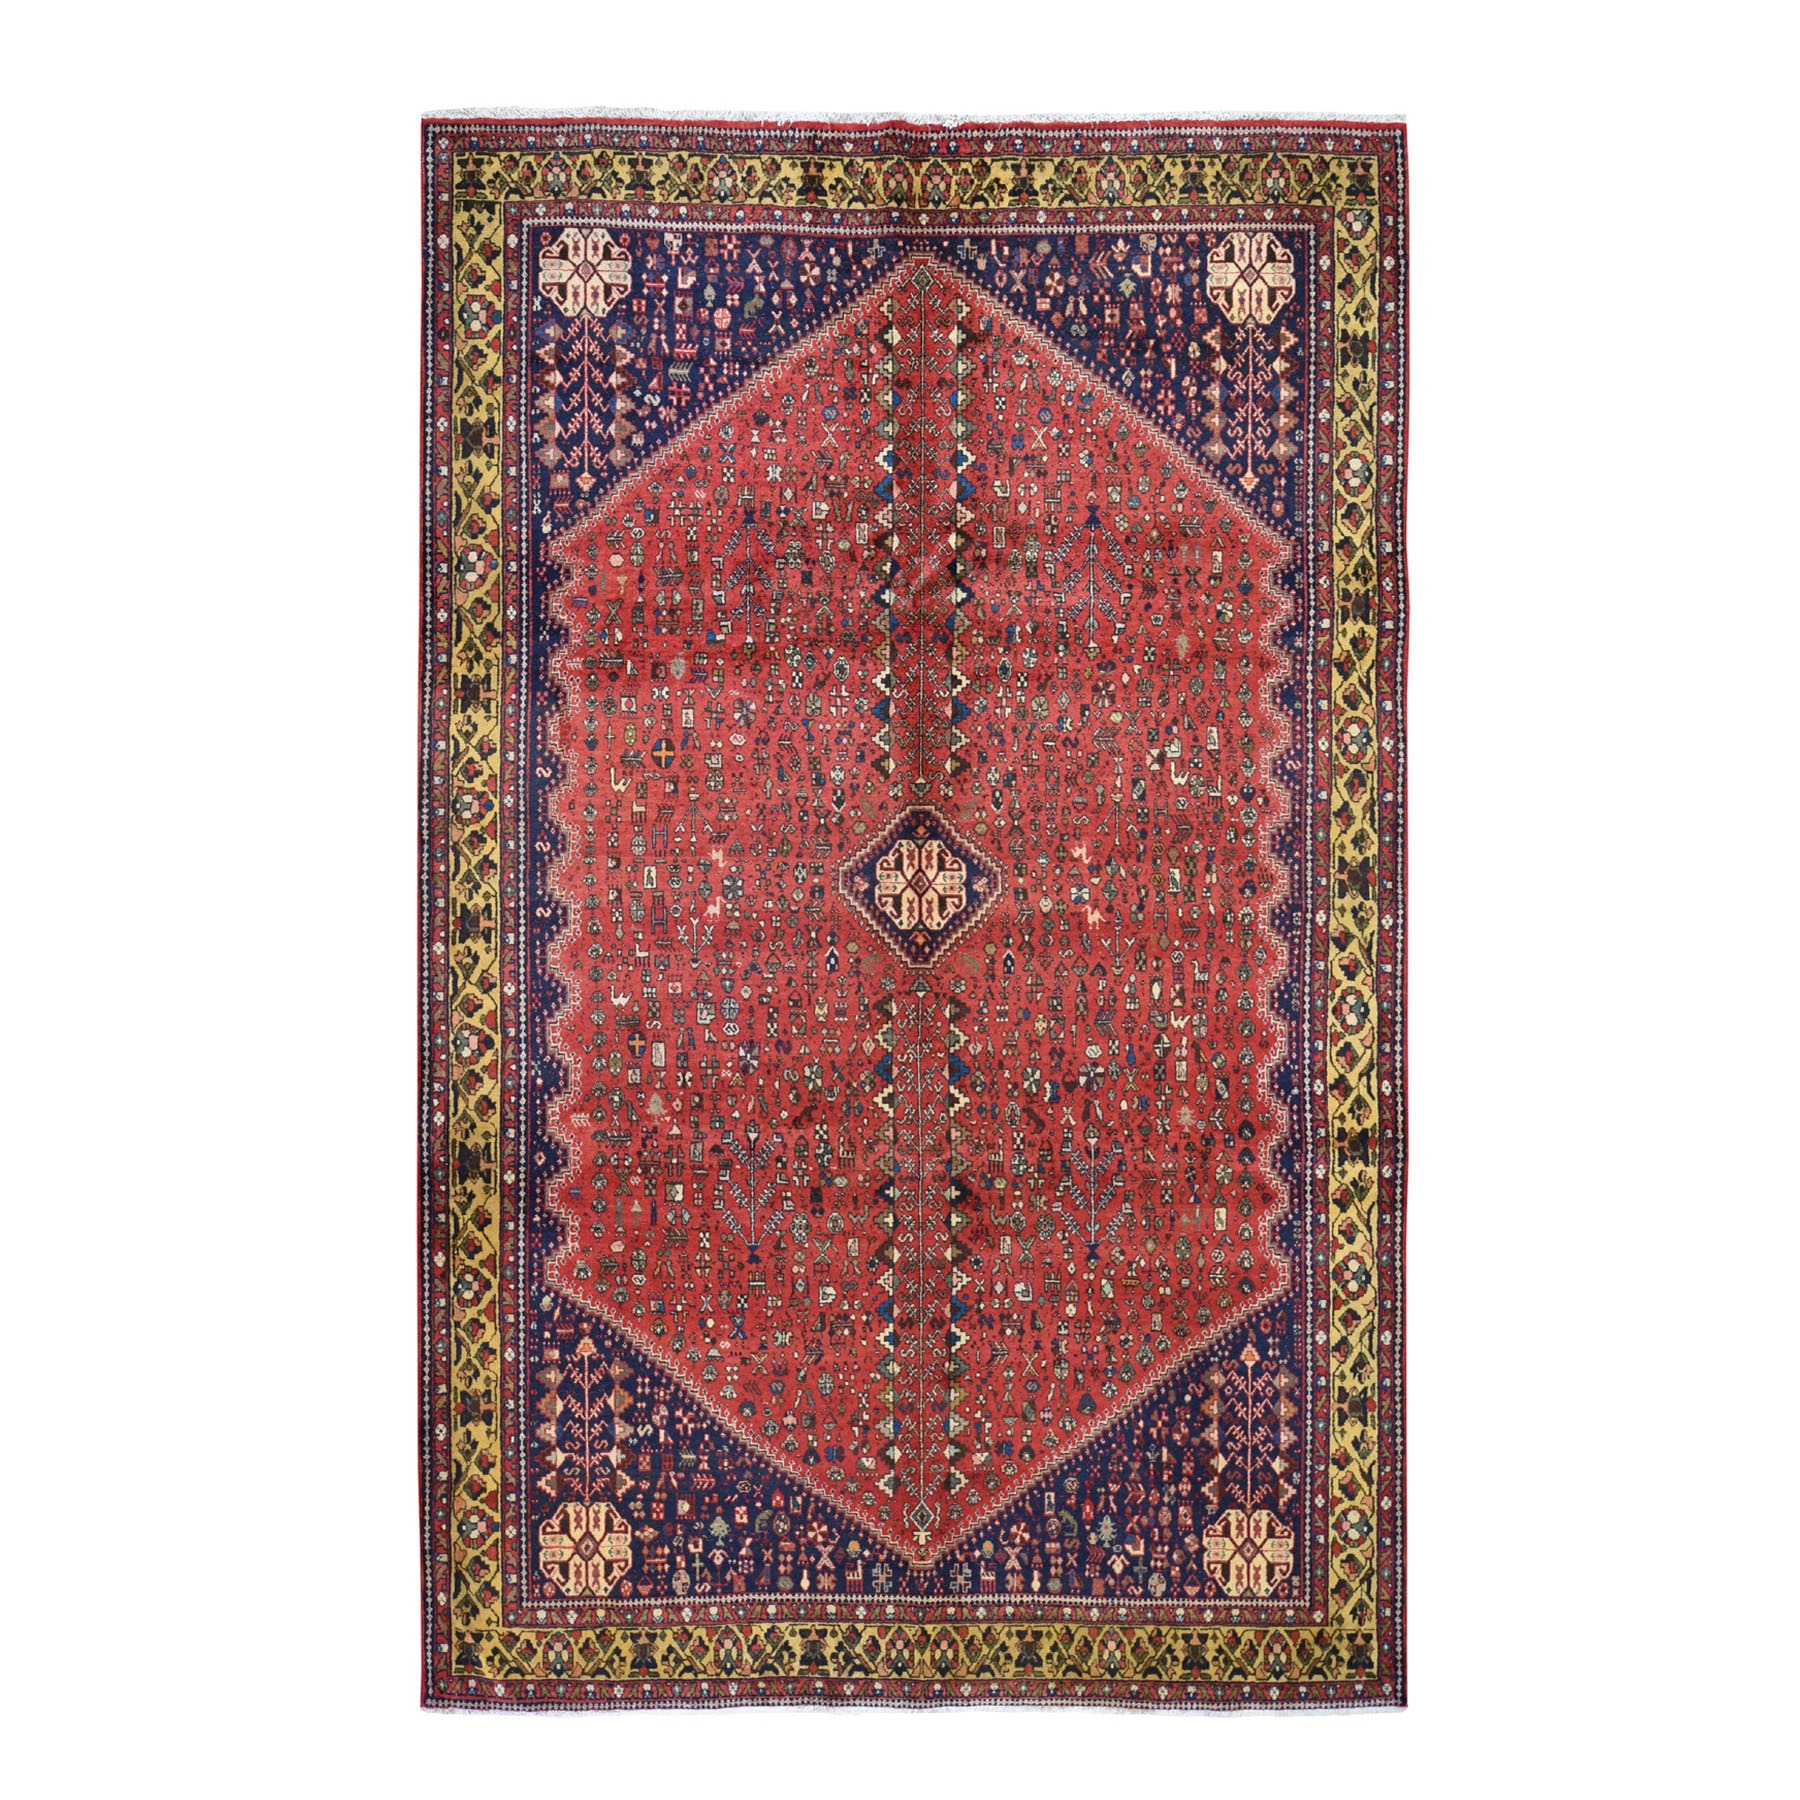 6'7"X9'4" Red Vintage Persian Shiraz Pure Wool Hand Knotted Exc Condition Oriental Rug moad7da8